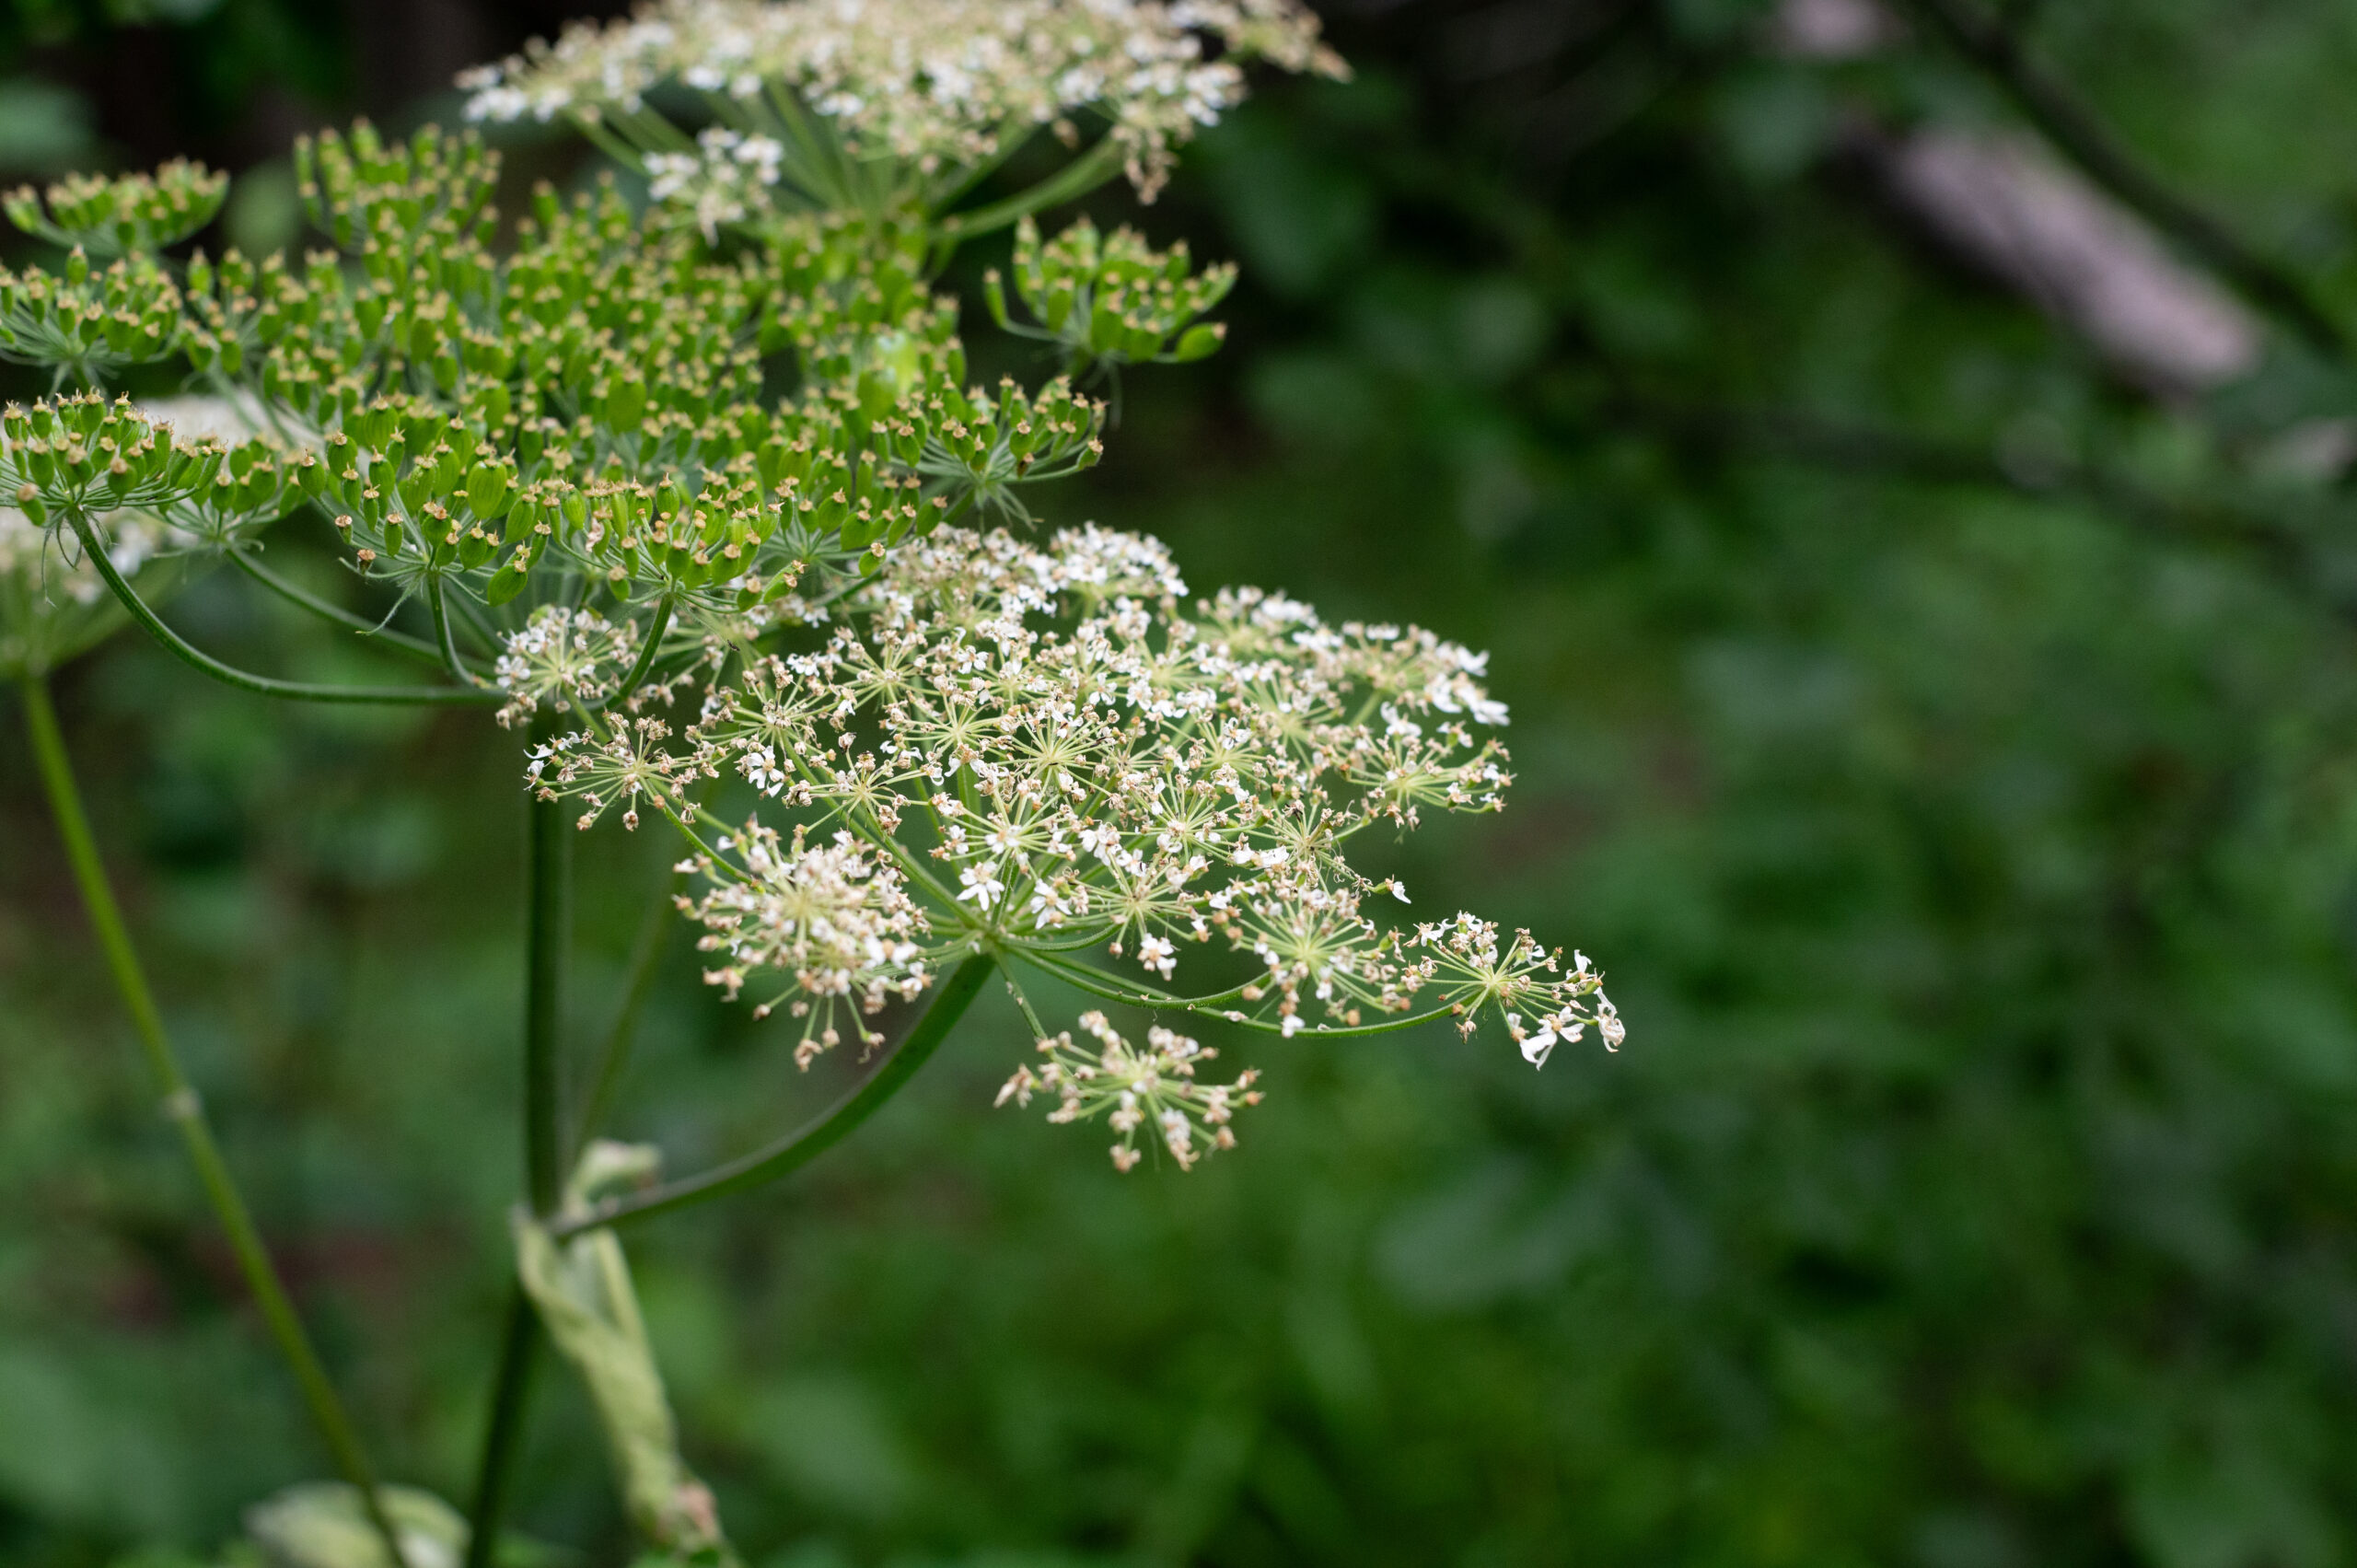 A group of cow parsnip plants